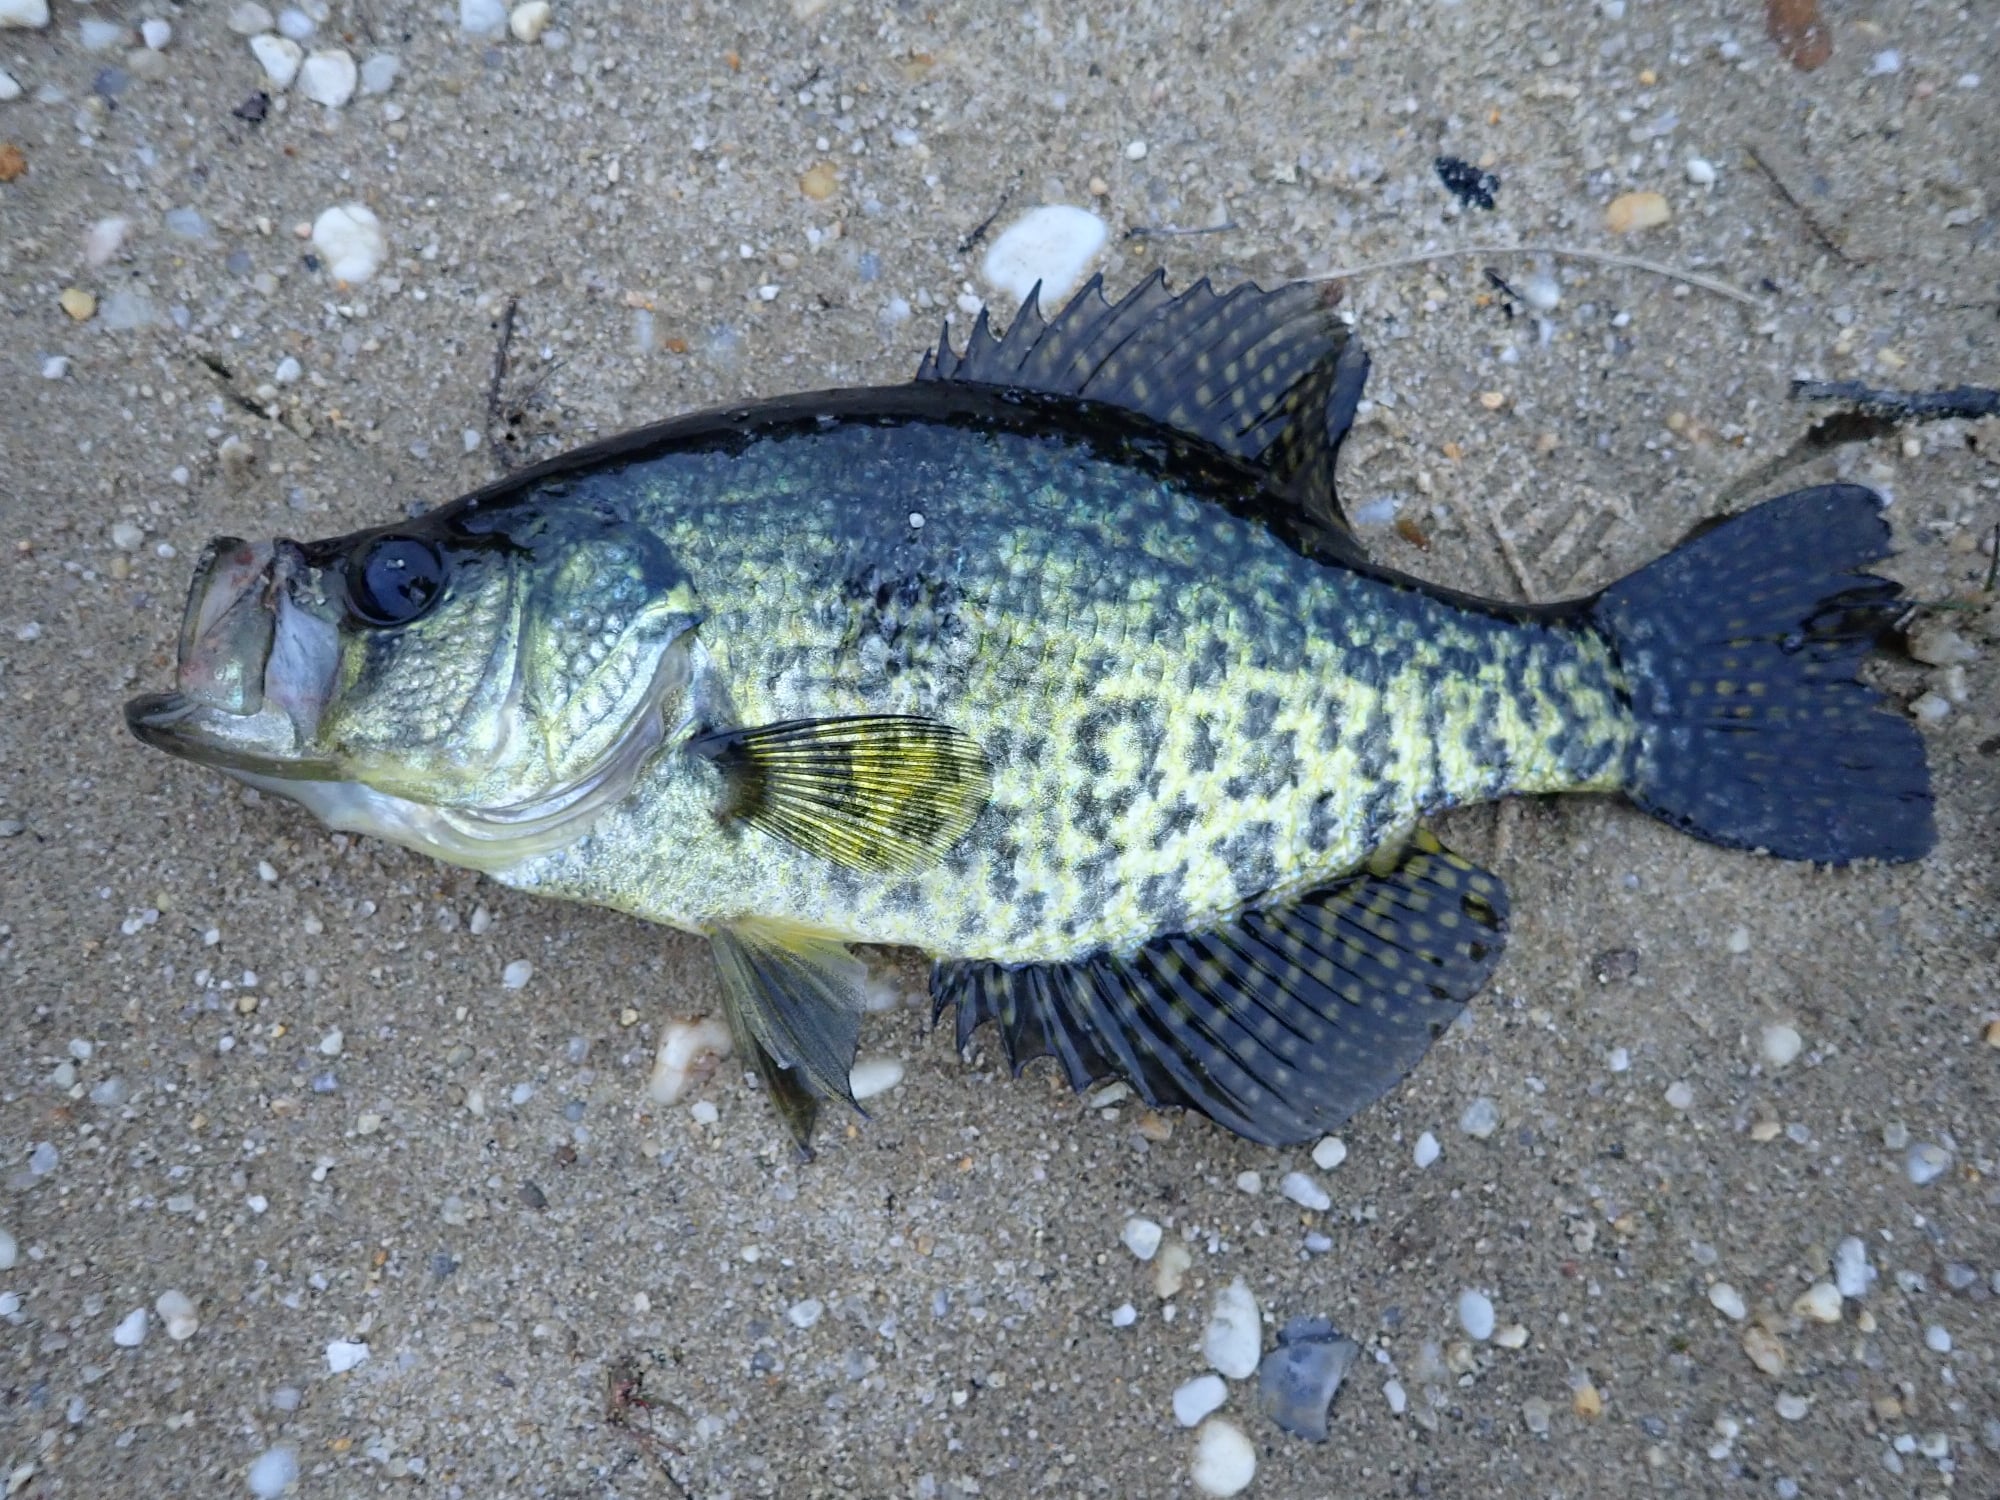 Potential competition between black crappie and invasive white perch in  freshwater reservoirs – Fish Habitat Section of the American Fisheries  Society